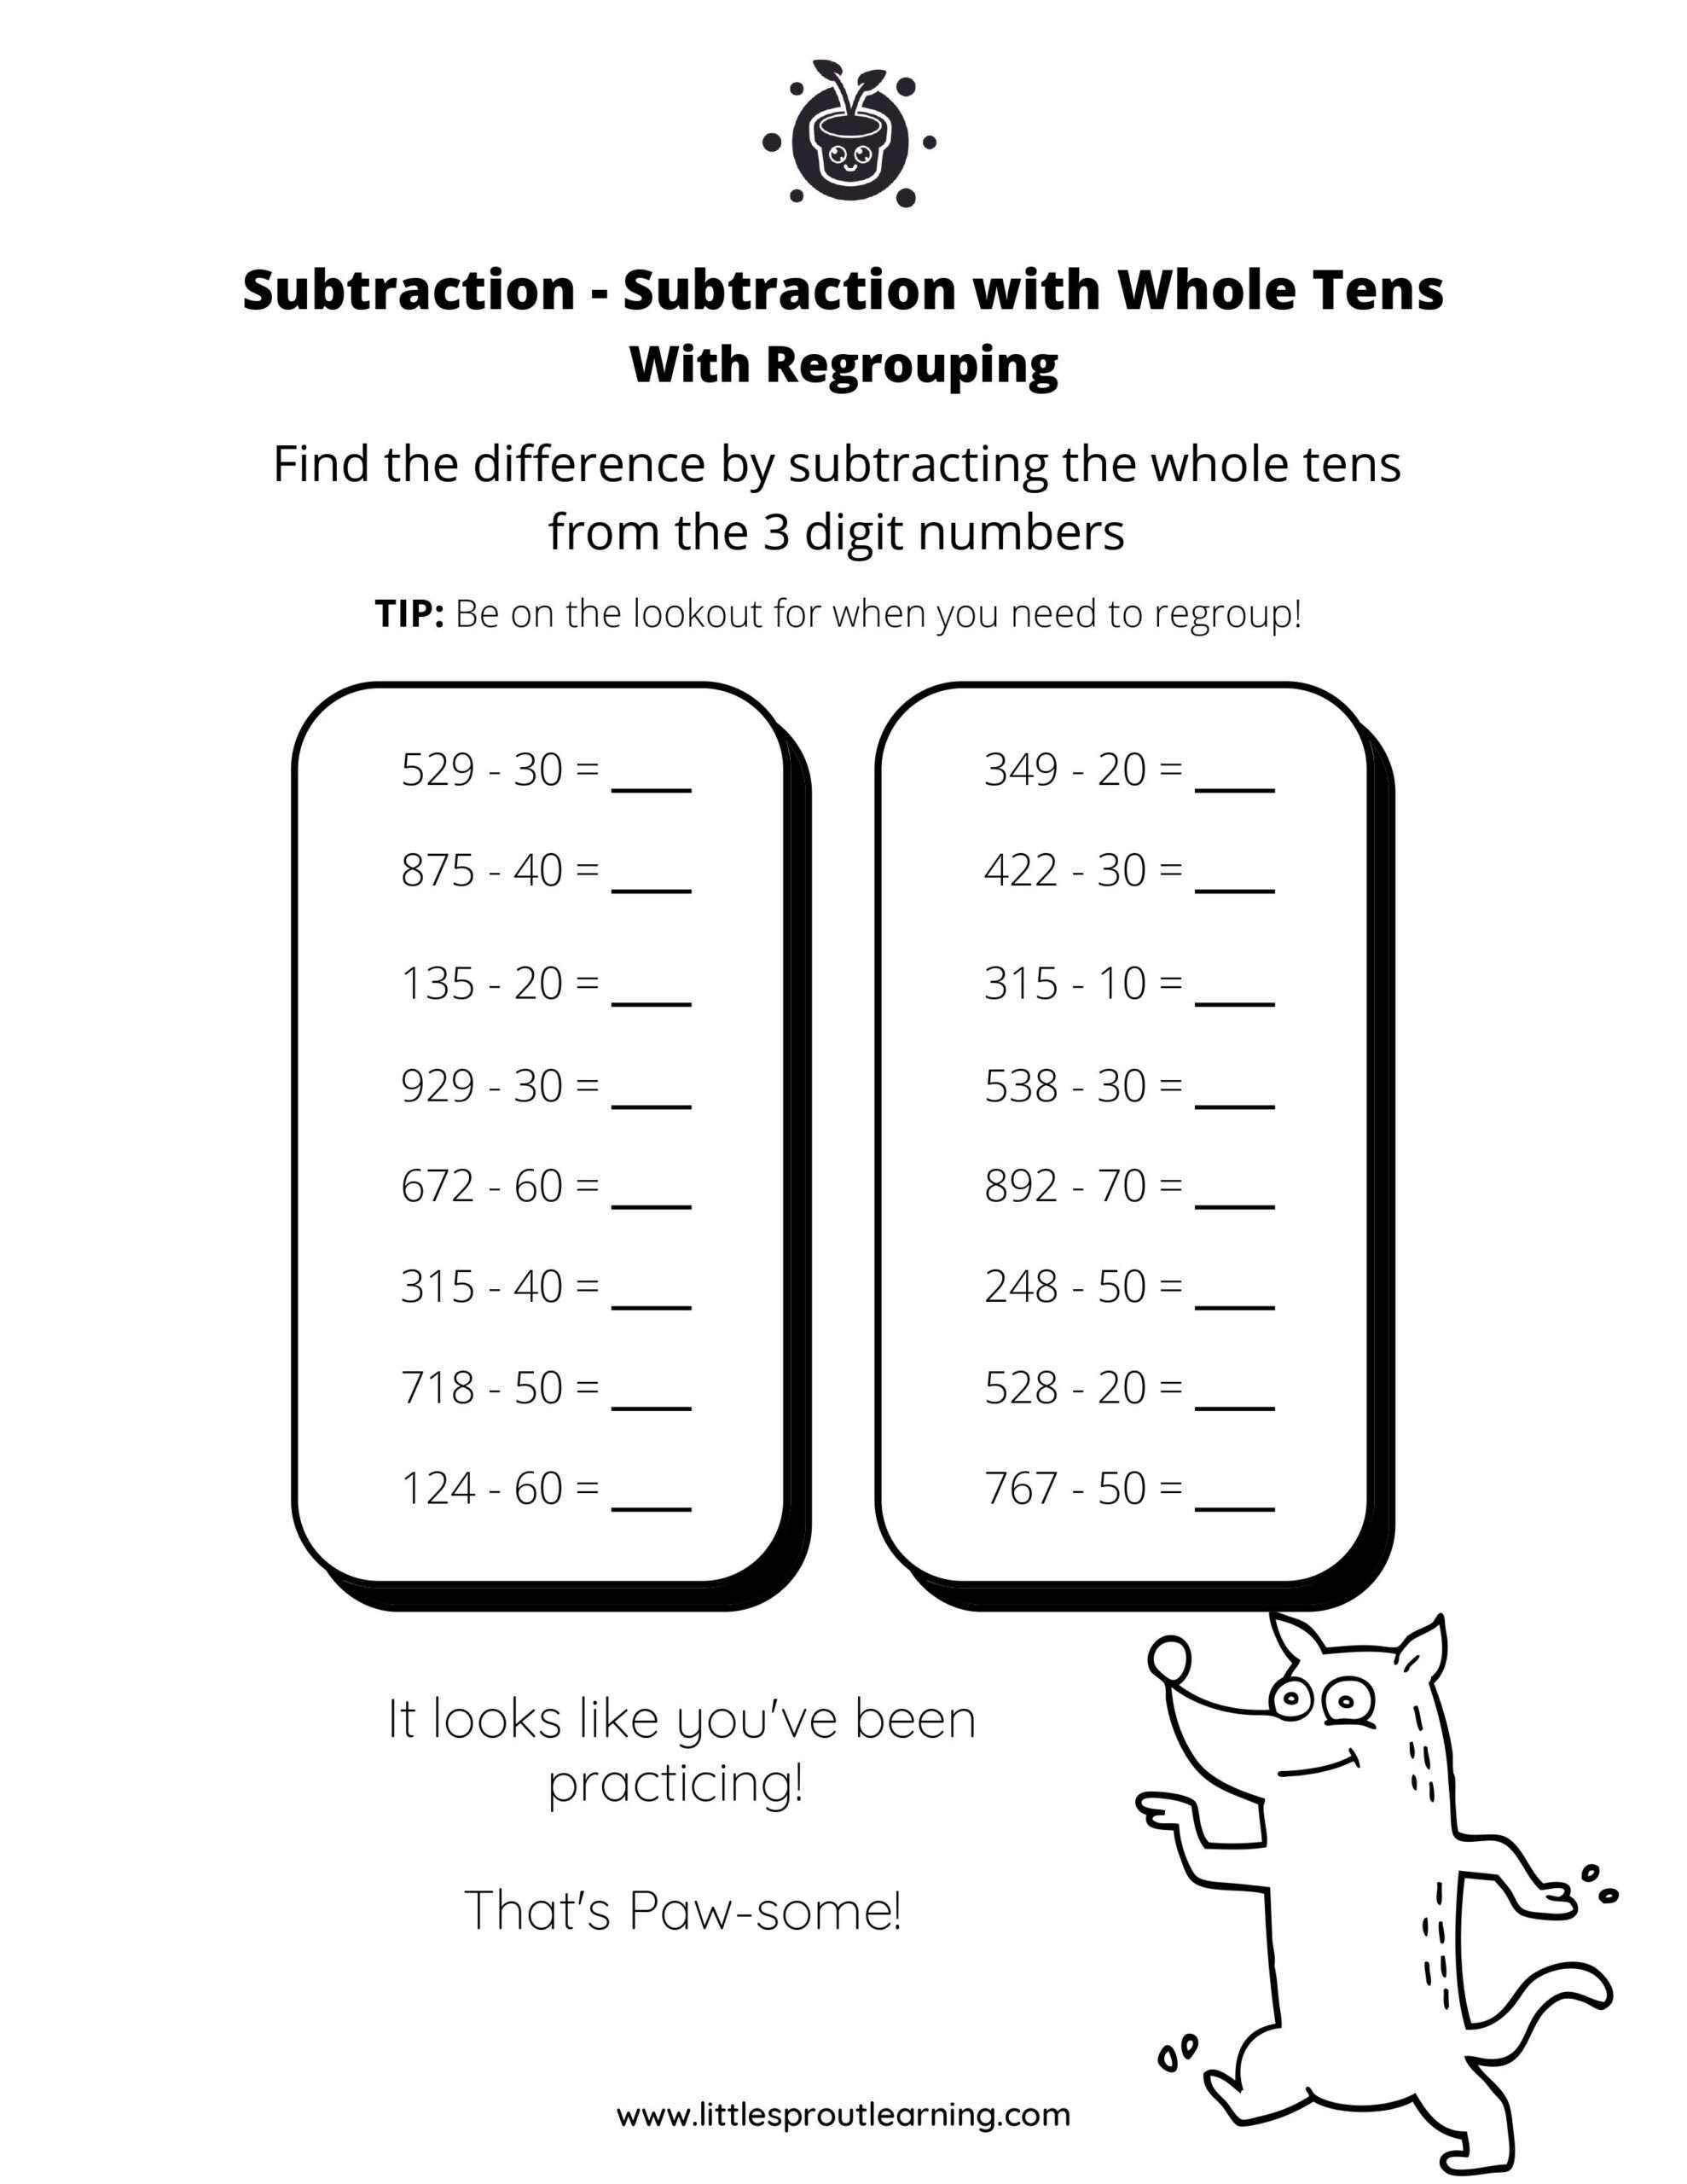 Subtraction with Whole Tens from 2 Digit Numbers (With Regrouping)